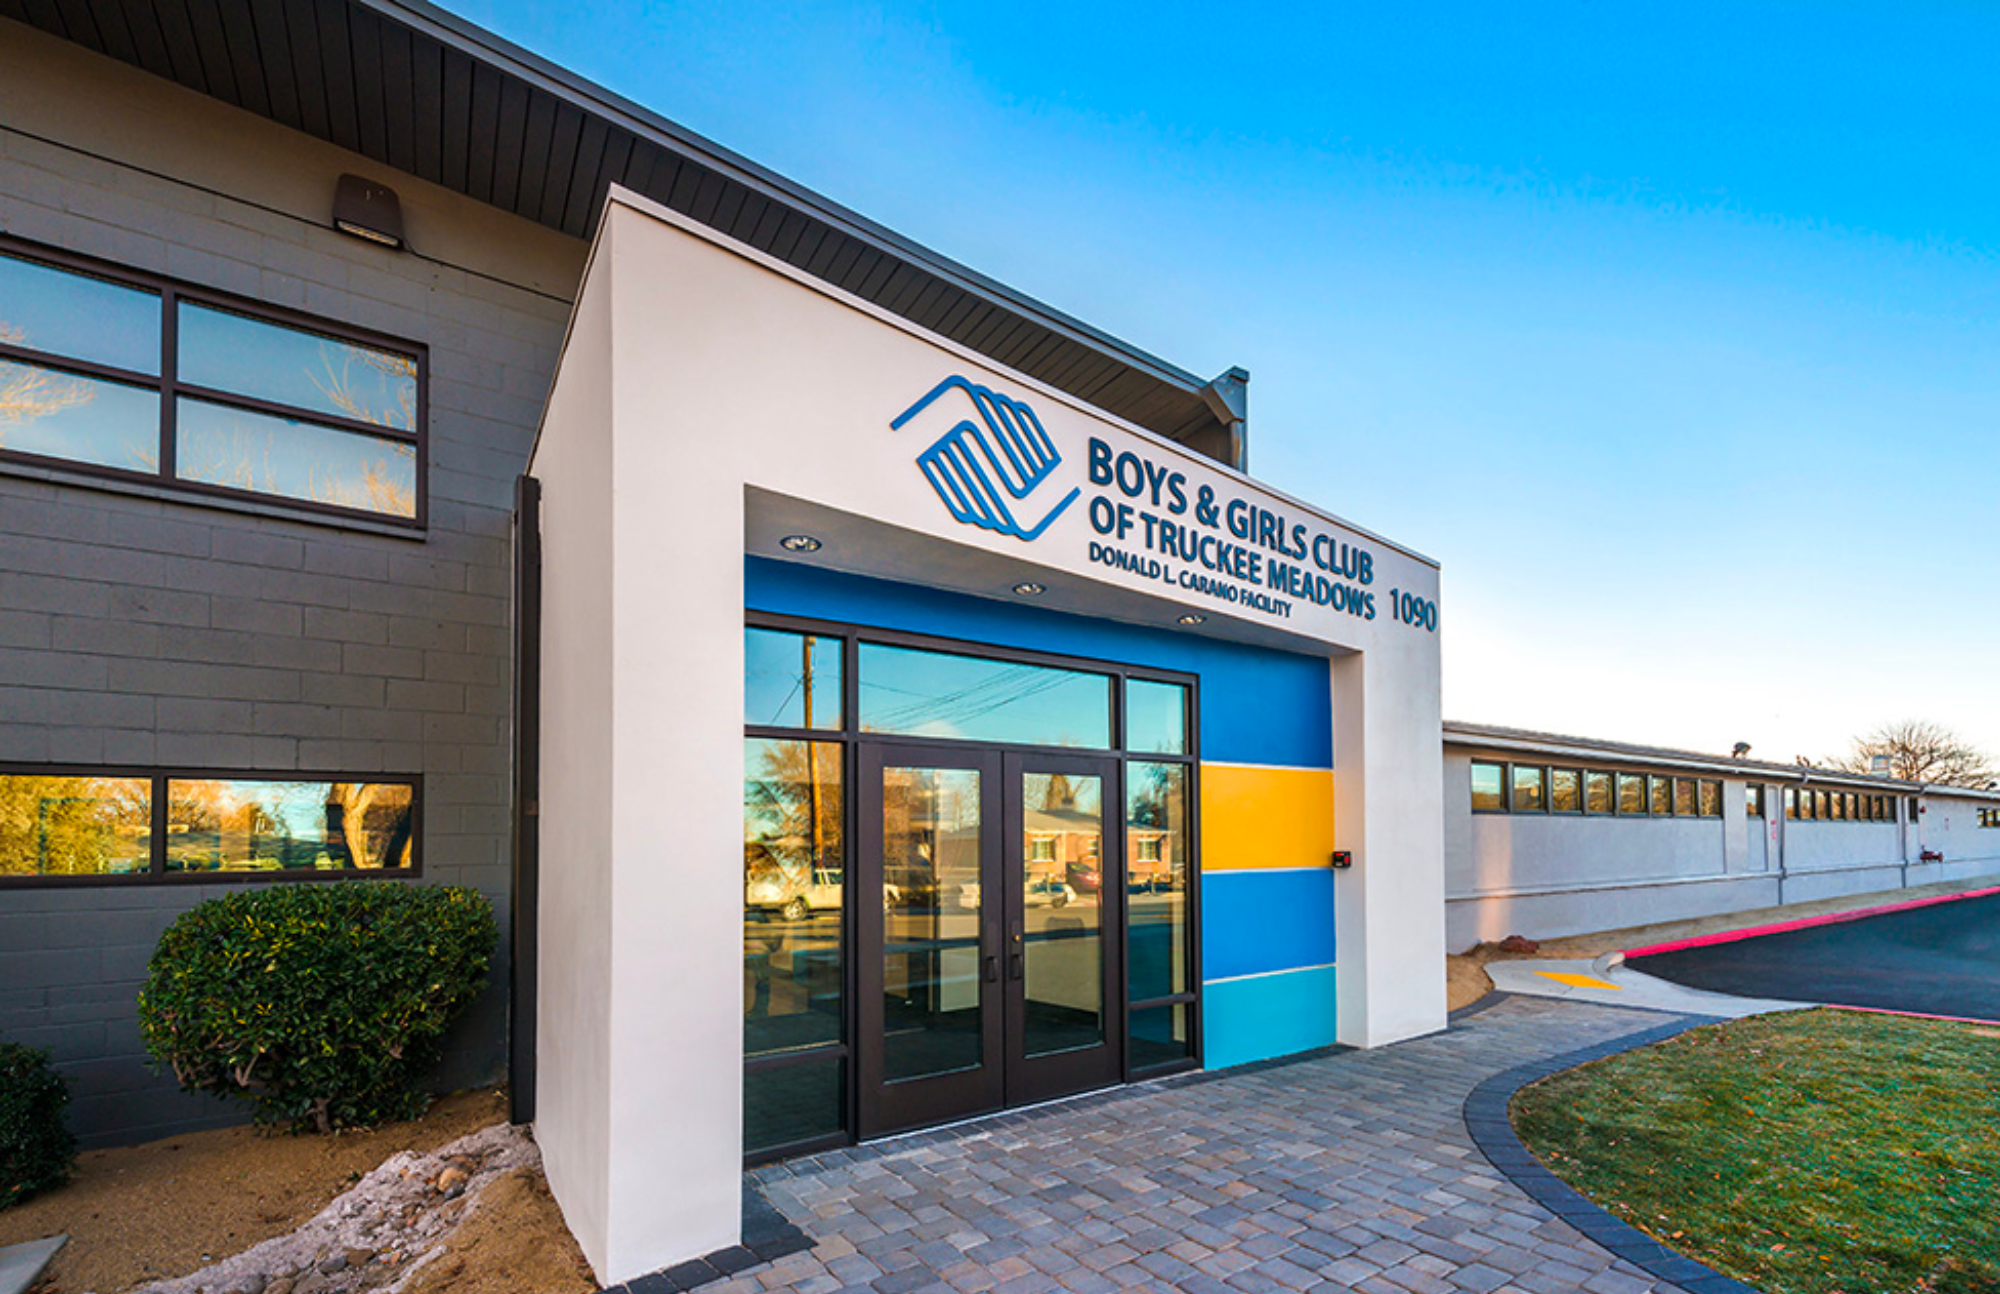 Front entrance of a modern building featuring Boys and Girls Club of Truckee Meadow signage over the door.